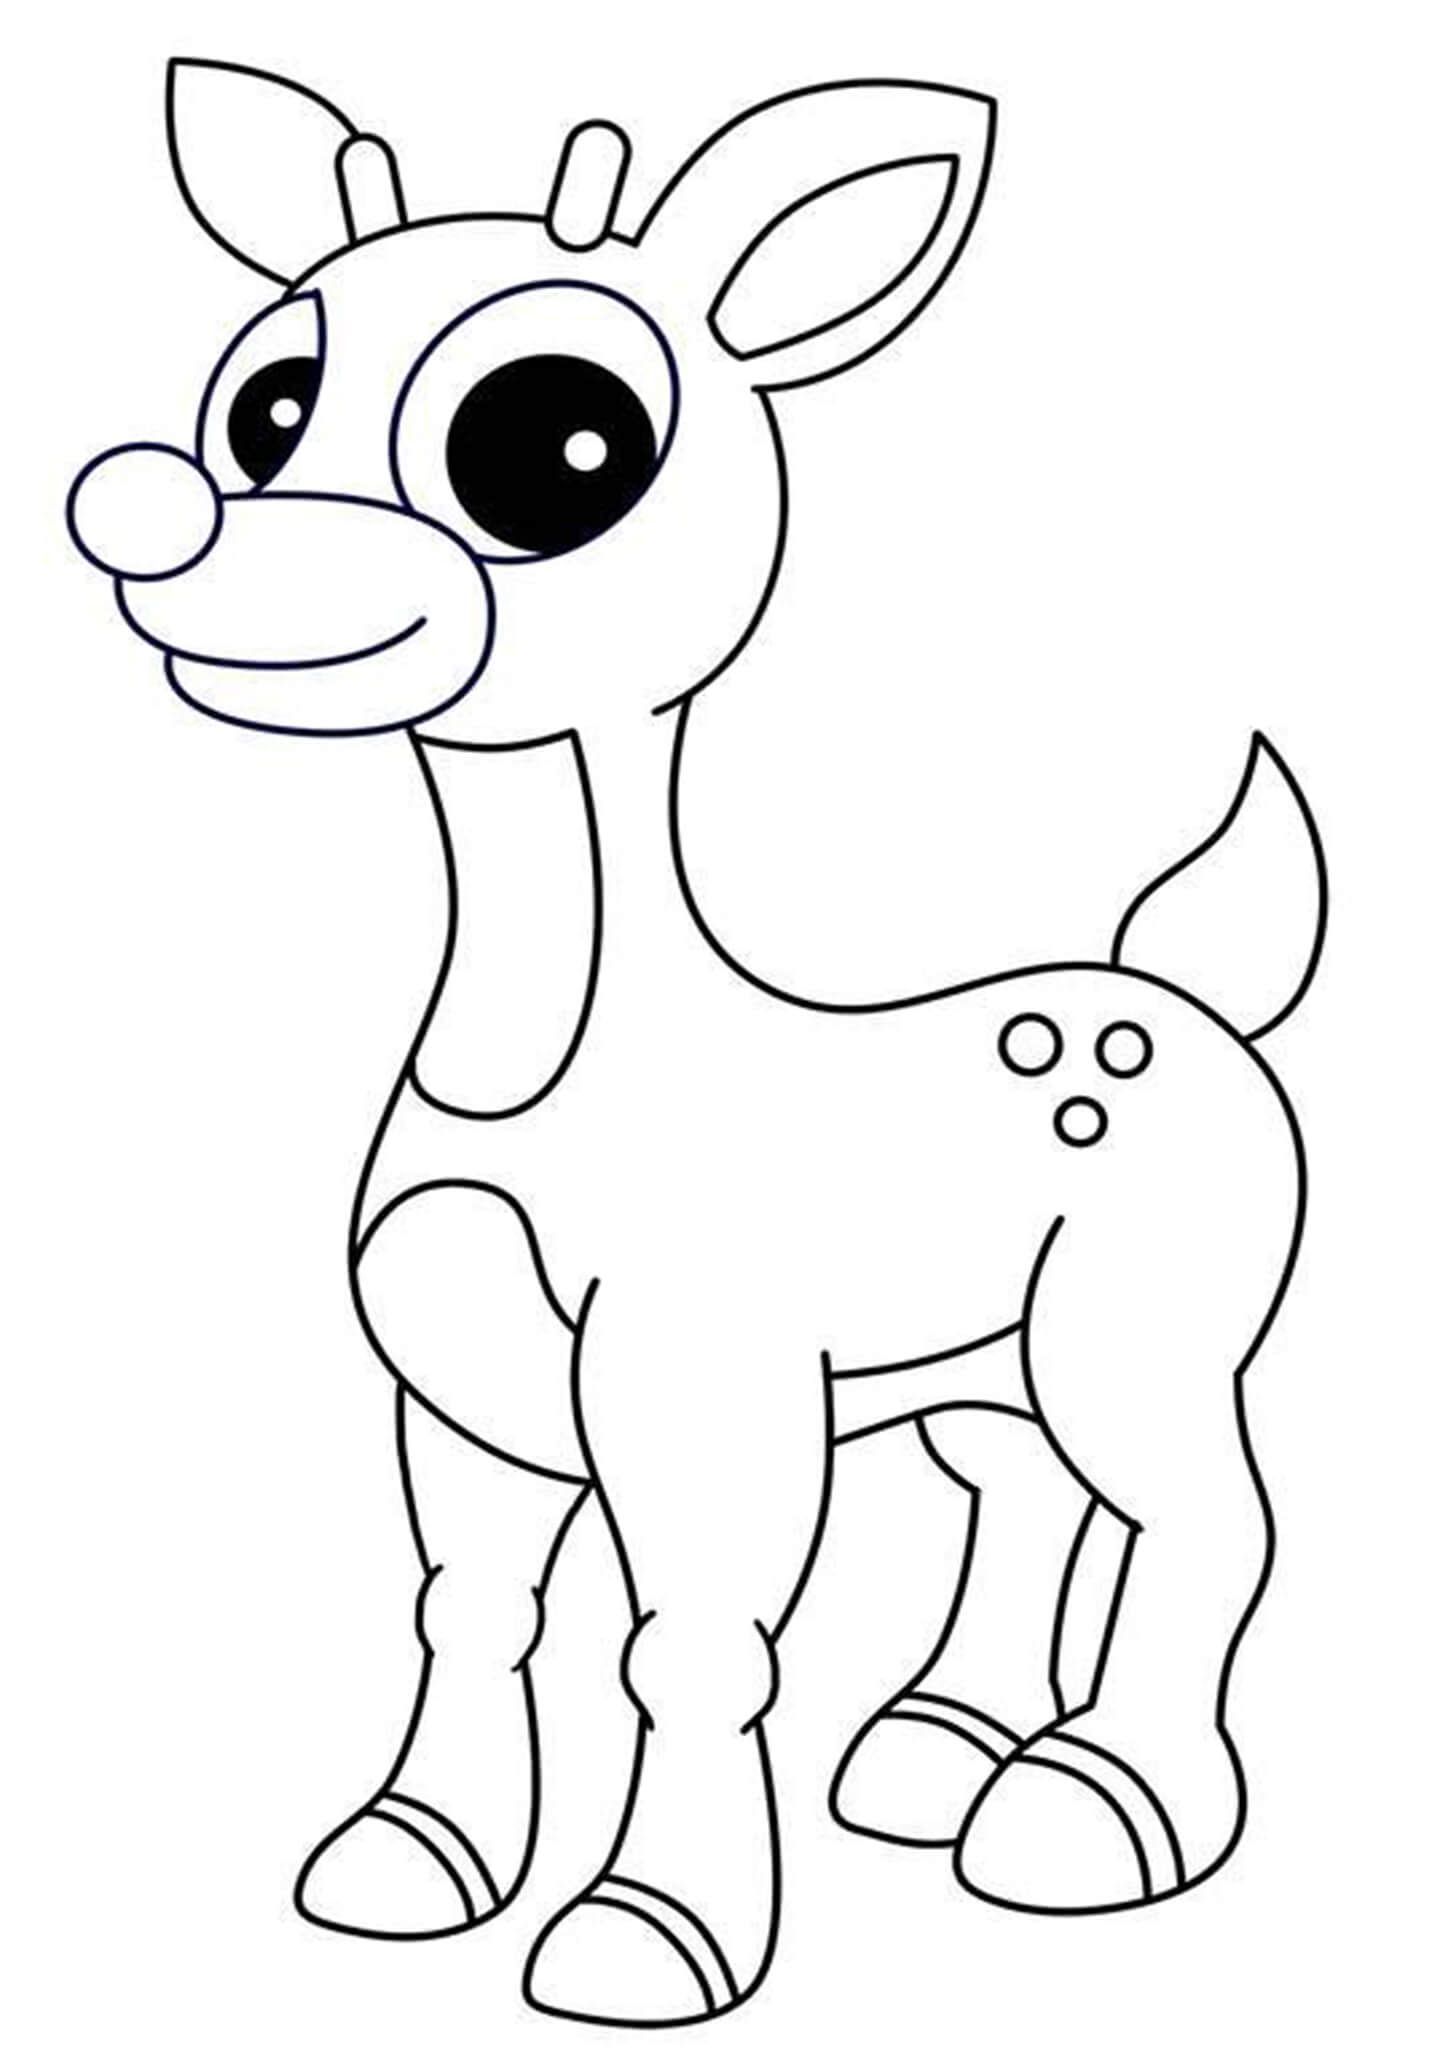 Rudolph the red nosed reindeer coloring pages reindeer drawing red nosed reindeer rudolph red nosed reindeer